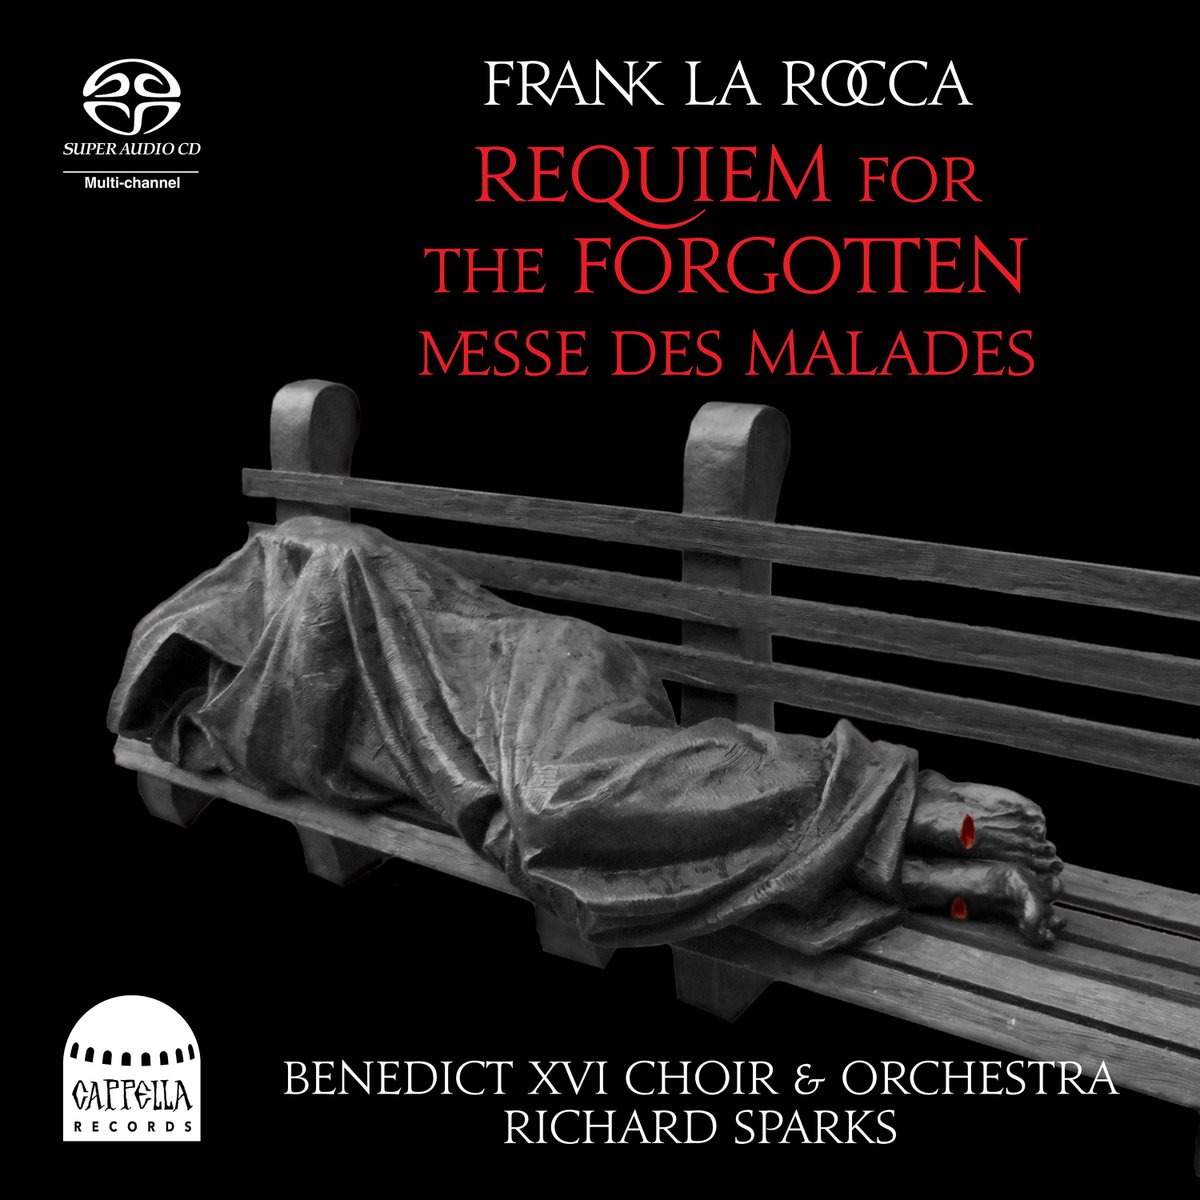 Cappella Records proudly announces the release of Frank LaRocca's Requiem for the Forgotten – Messe des Malades, performed by the Benedict XVI Choir and Orchestra, directed by renowned international conductor Richard Sparks! Available everywhere you listen cappellarecords.com/laroccarequiem